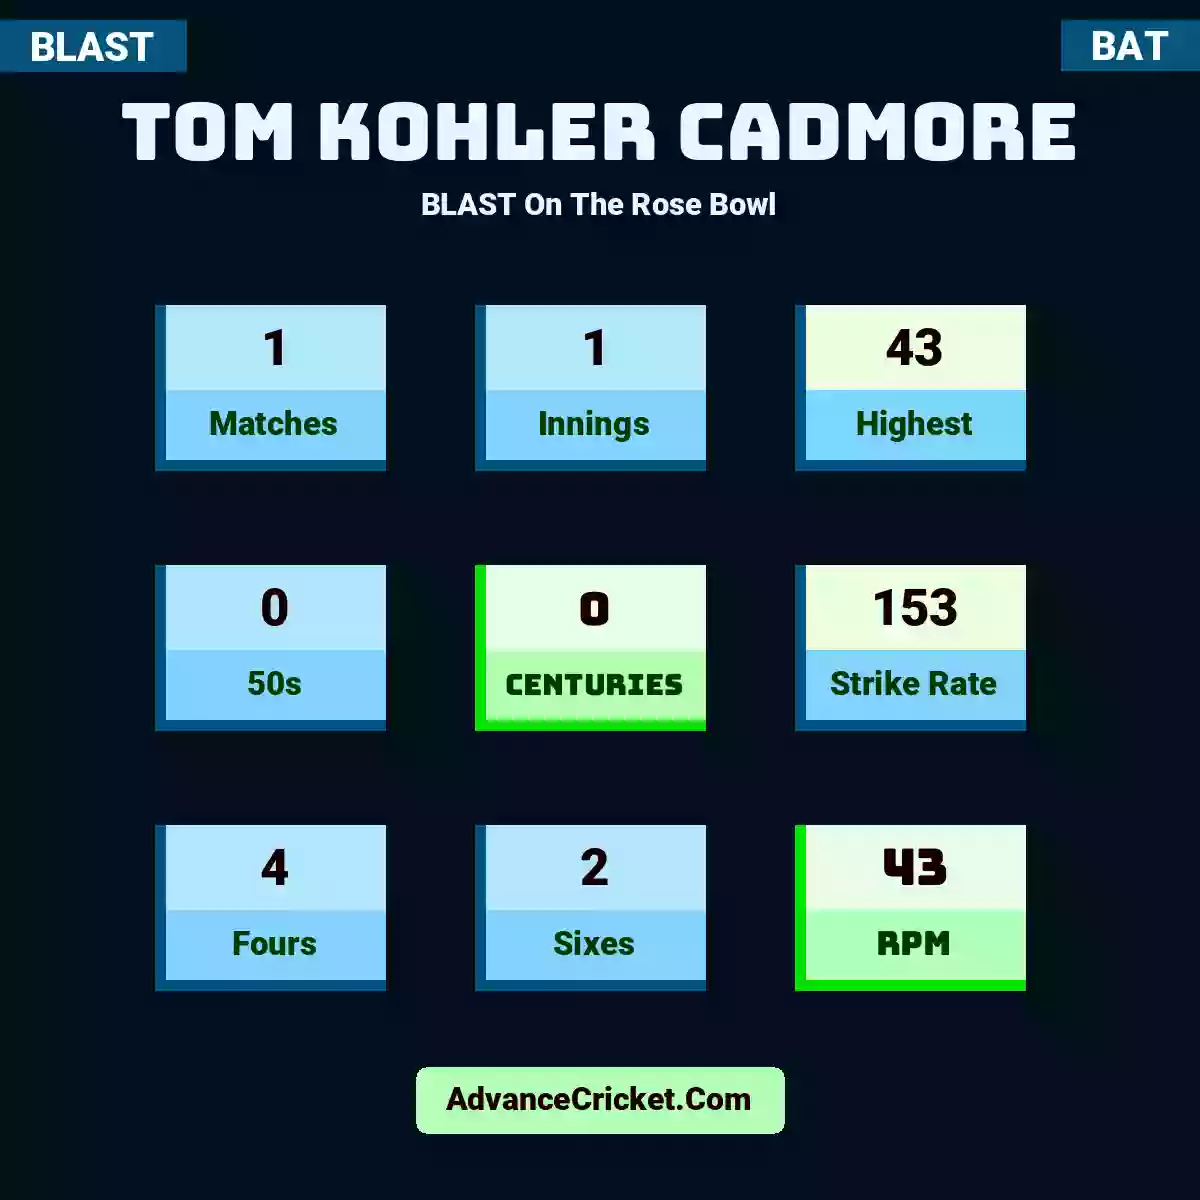 Tom Kohler Cadmore BLAST  On The Rose Bowl, Tom Kohler Cadmore played 1 matches, scored 43 runs as highest, 0 half-centuries, and 0 centuries, with a strike rate of 153. T.Cadmore hit 4 fours and 2 sixes, with an RPM of 43.